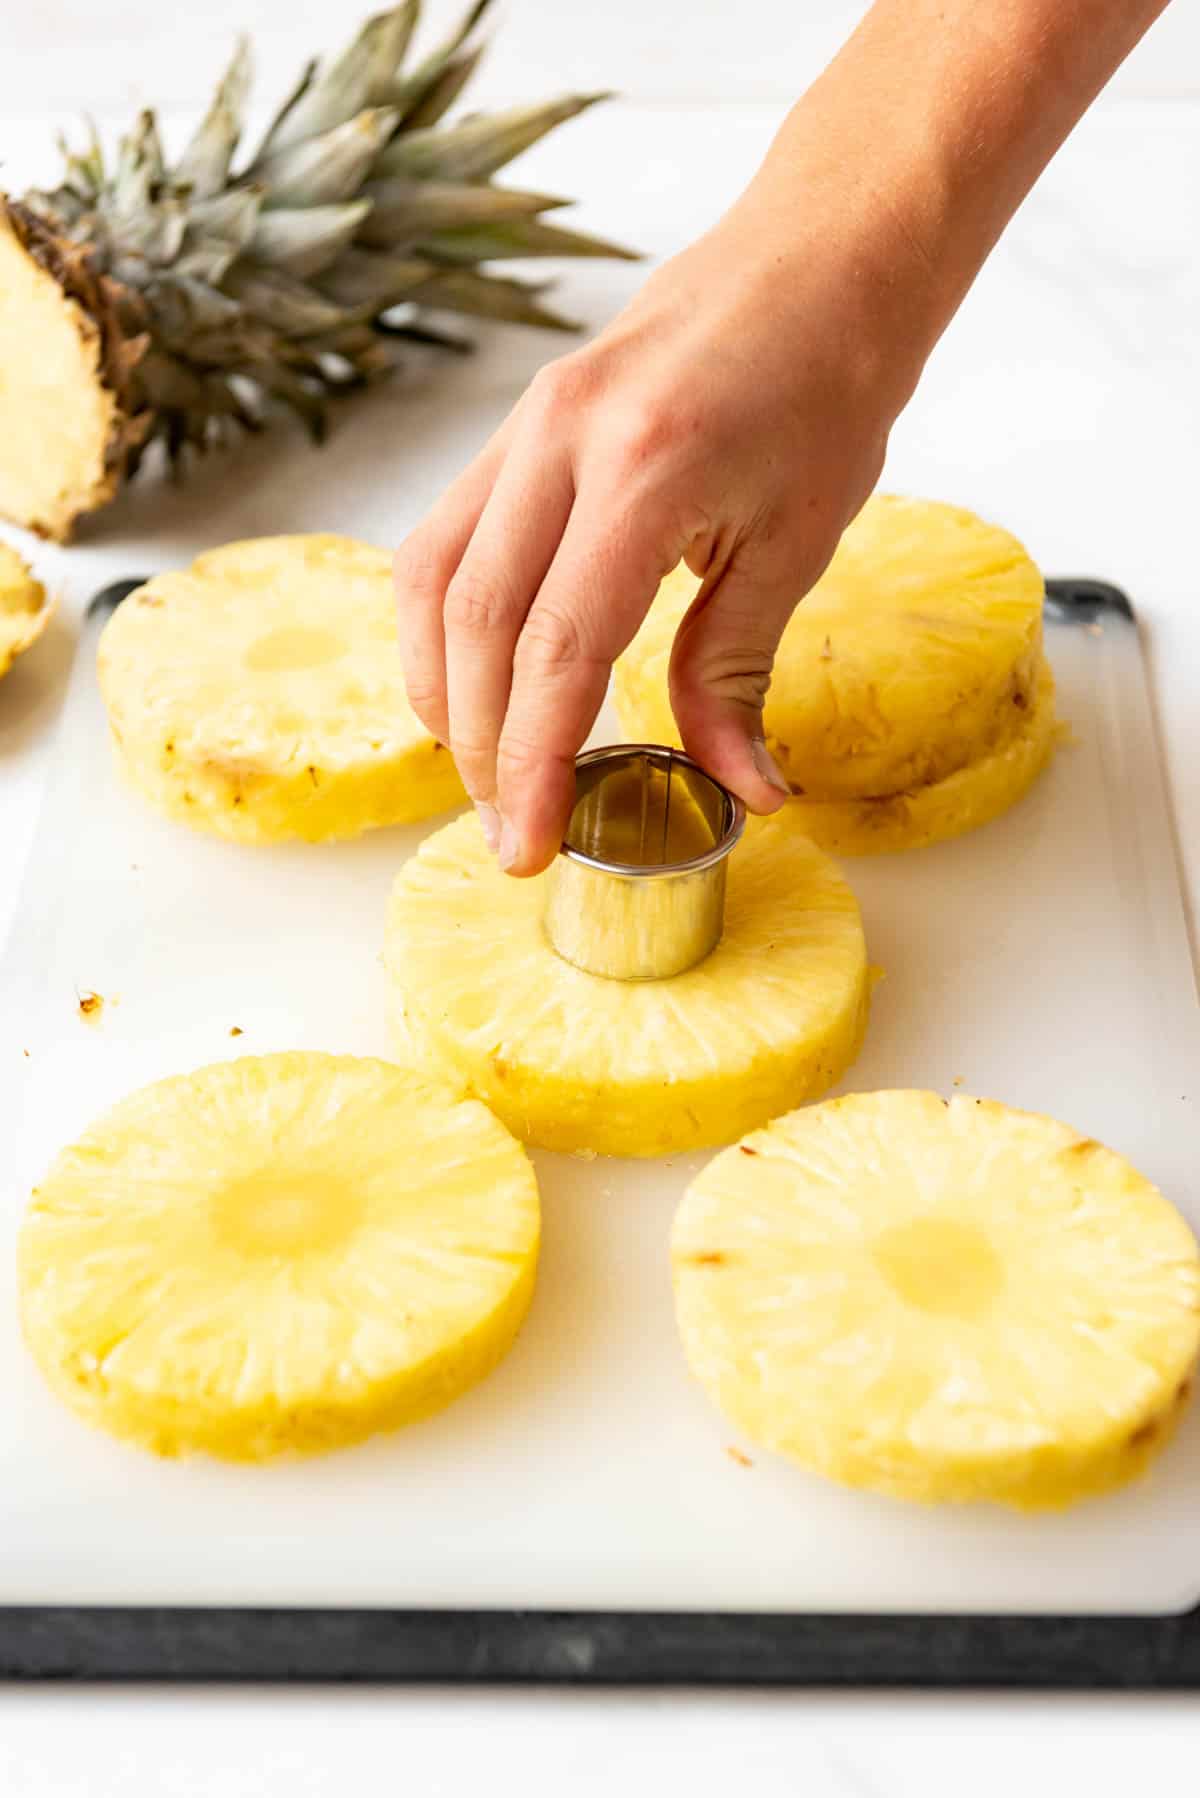 A hand holding a small circular metal cutter to remove the core from slices of fresh pineapple.